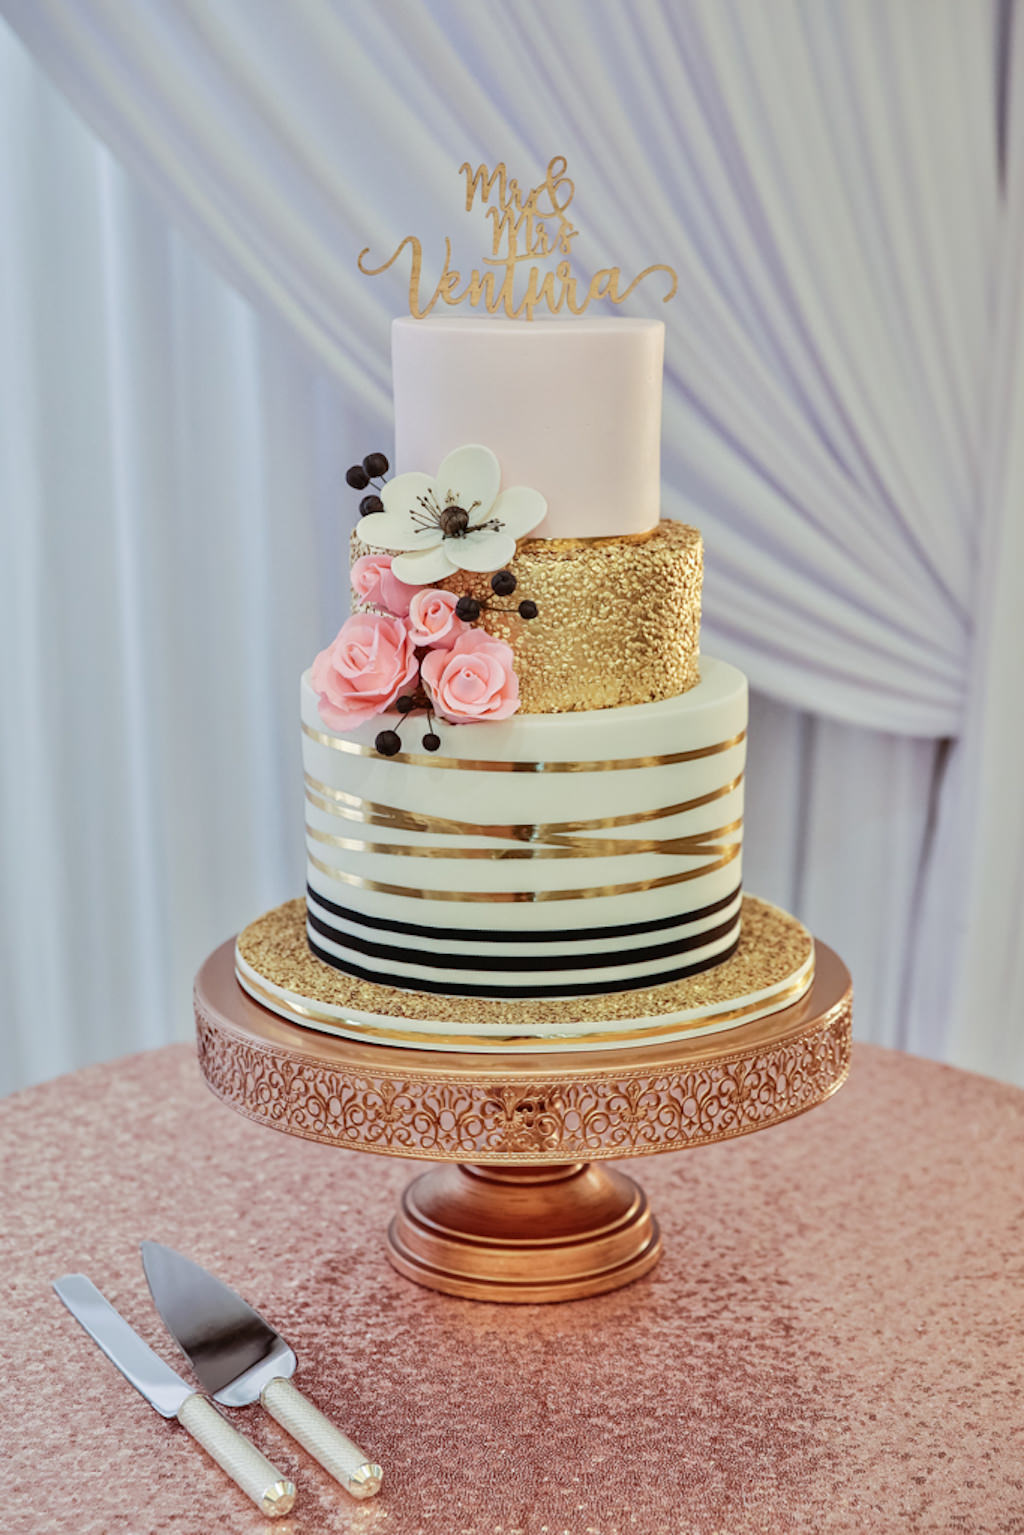 Three Tier Round Wedding Cake with BLush Pink, Gold Foil, Gold Ribbon and Black and White Stripe Icing, Edible Black, White, and Pink Floral Decorations, Rose Gold Cake Stand and Sequin Linen, and Stylish Gold Caketopper